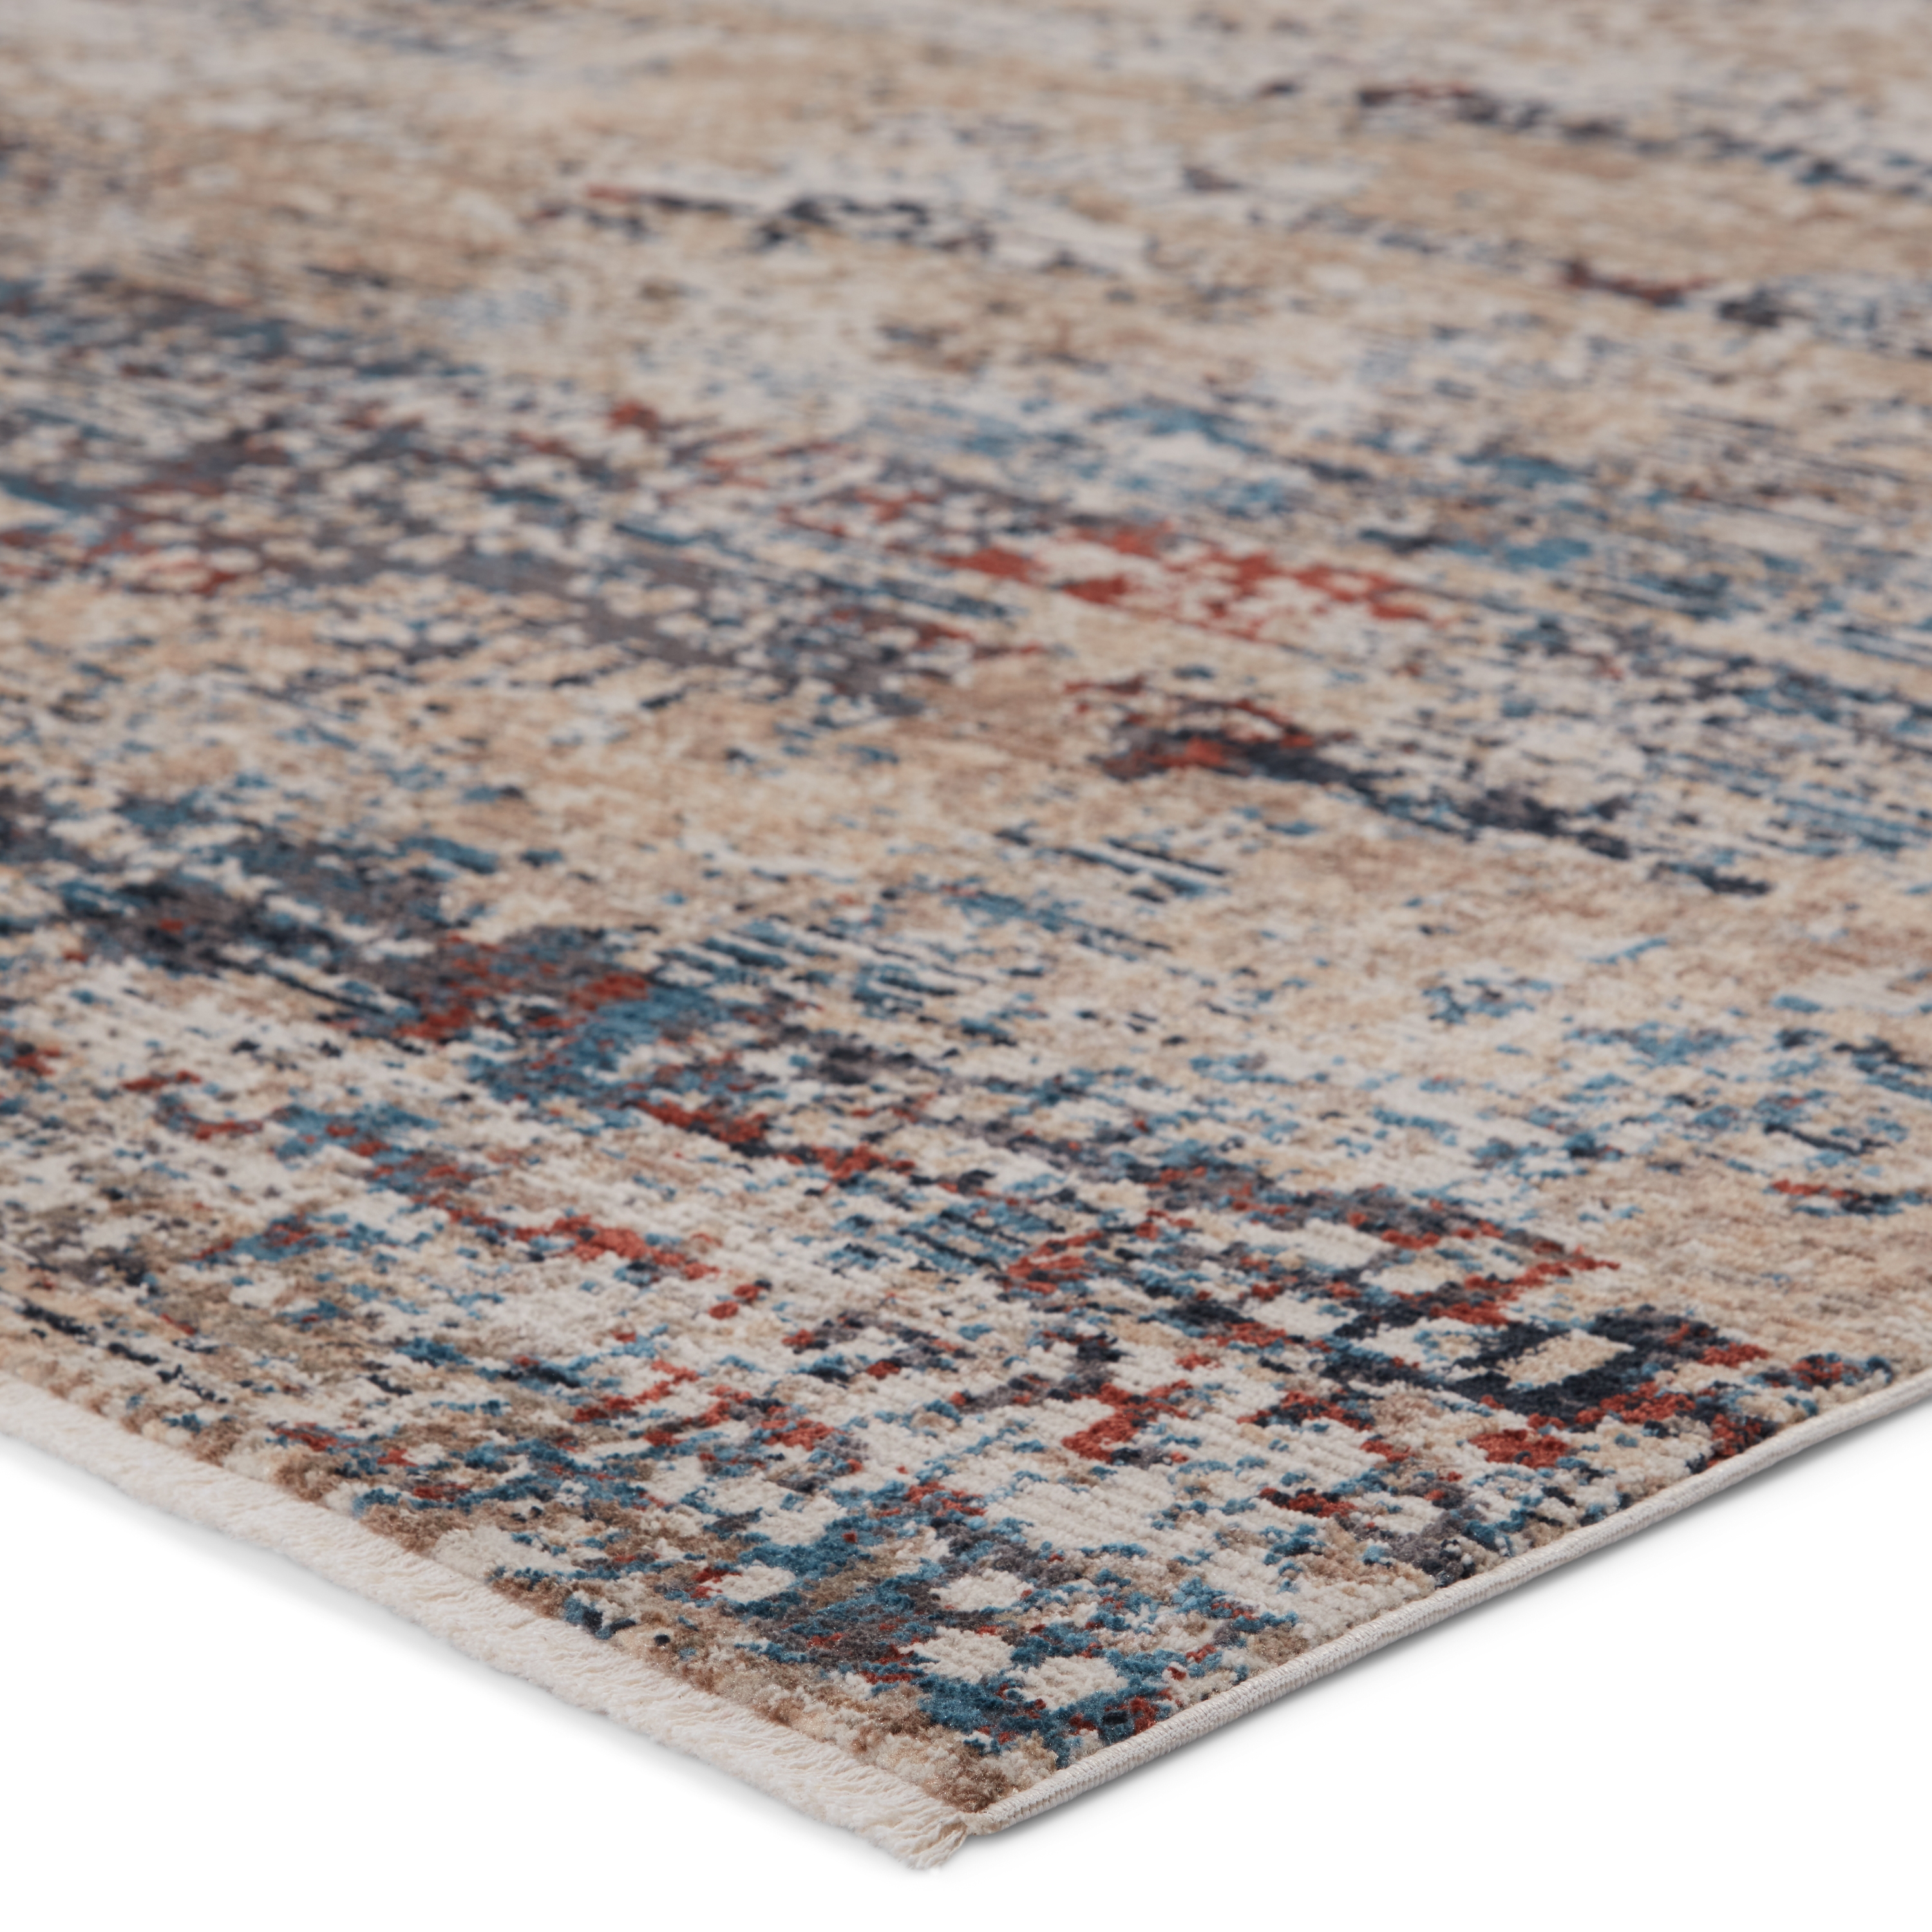 Vibe by Halston Abstract Blue/ Gray Area Rug (7'10"X10'10") - Image 1